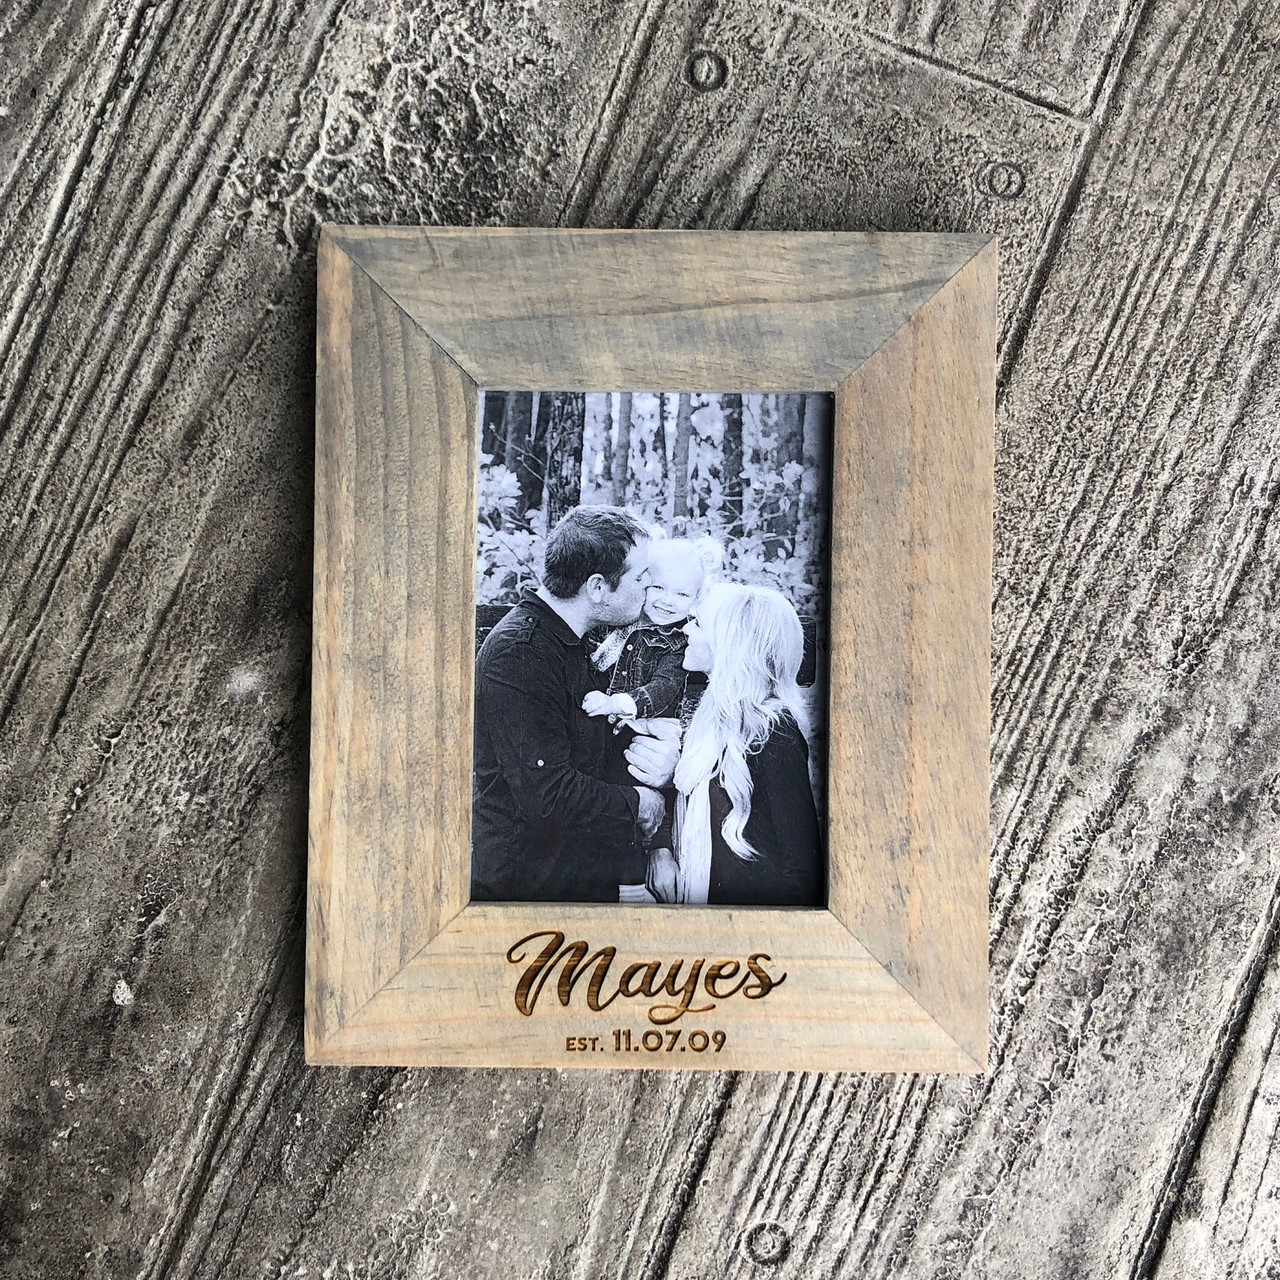 https://cdn11.bigcommerce.com/s-pza6oiin/images/stencil/1280x1280/products/9789/16869/customengravedfamilynamewoodenpictureframe_3399__25069.1574187284.jpg?c=2?imbypass=on